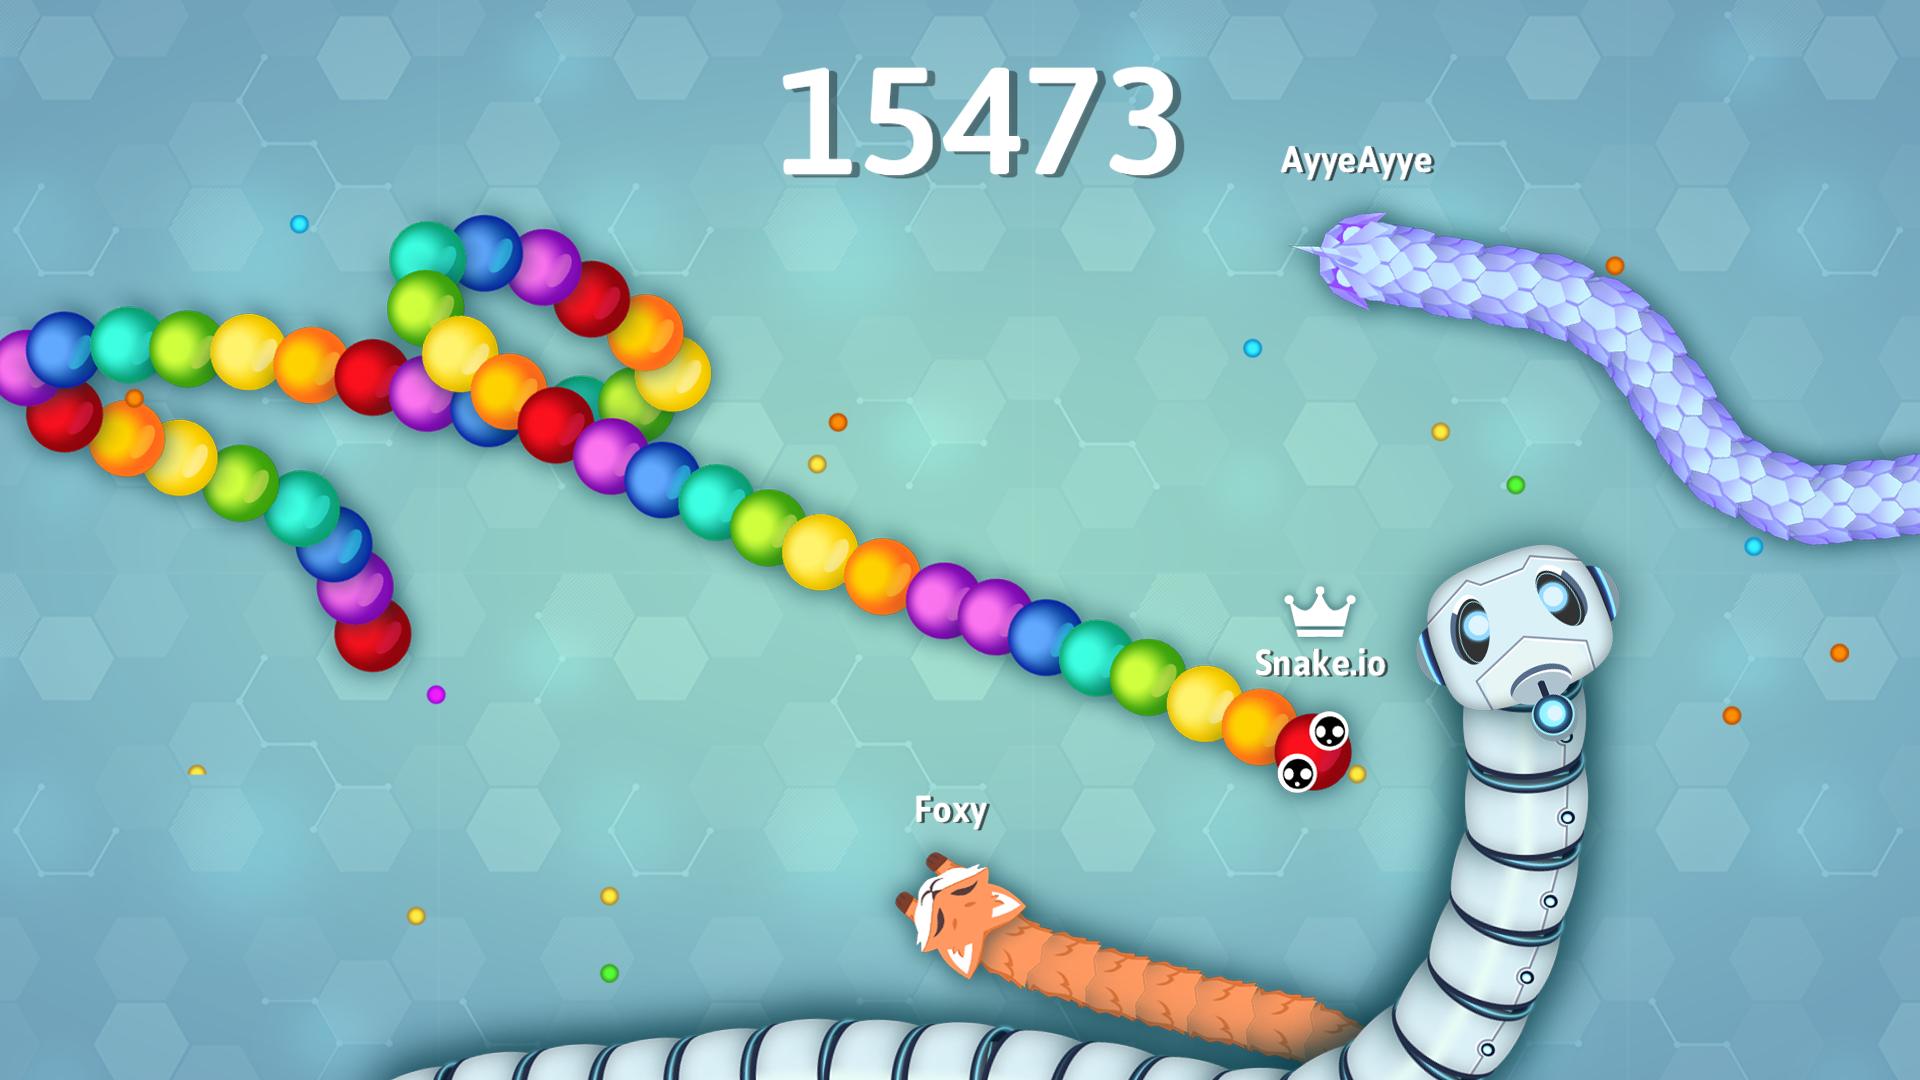 Download Snake.io (MOD, Unlimited Money) 2.0.9 APK for android